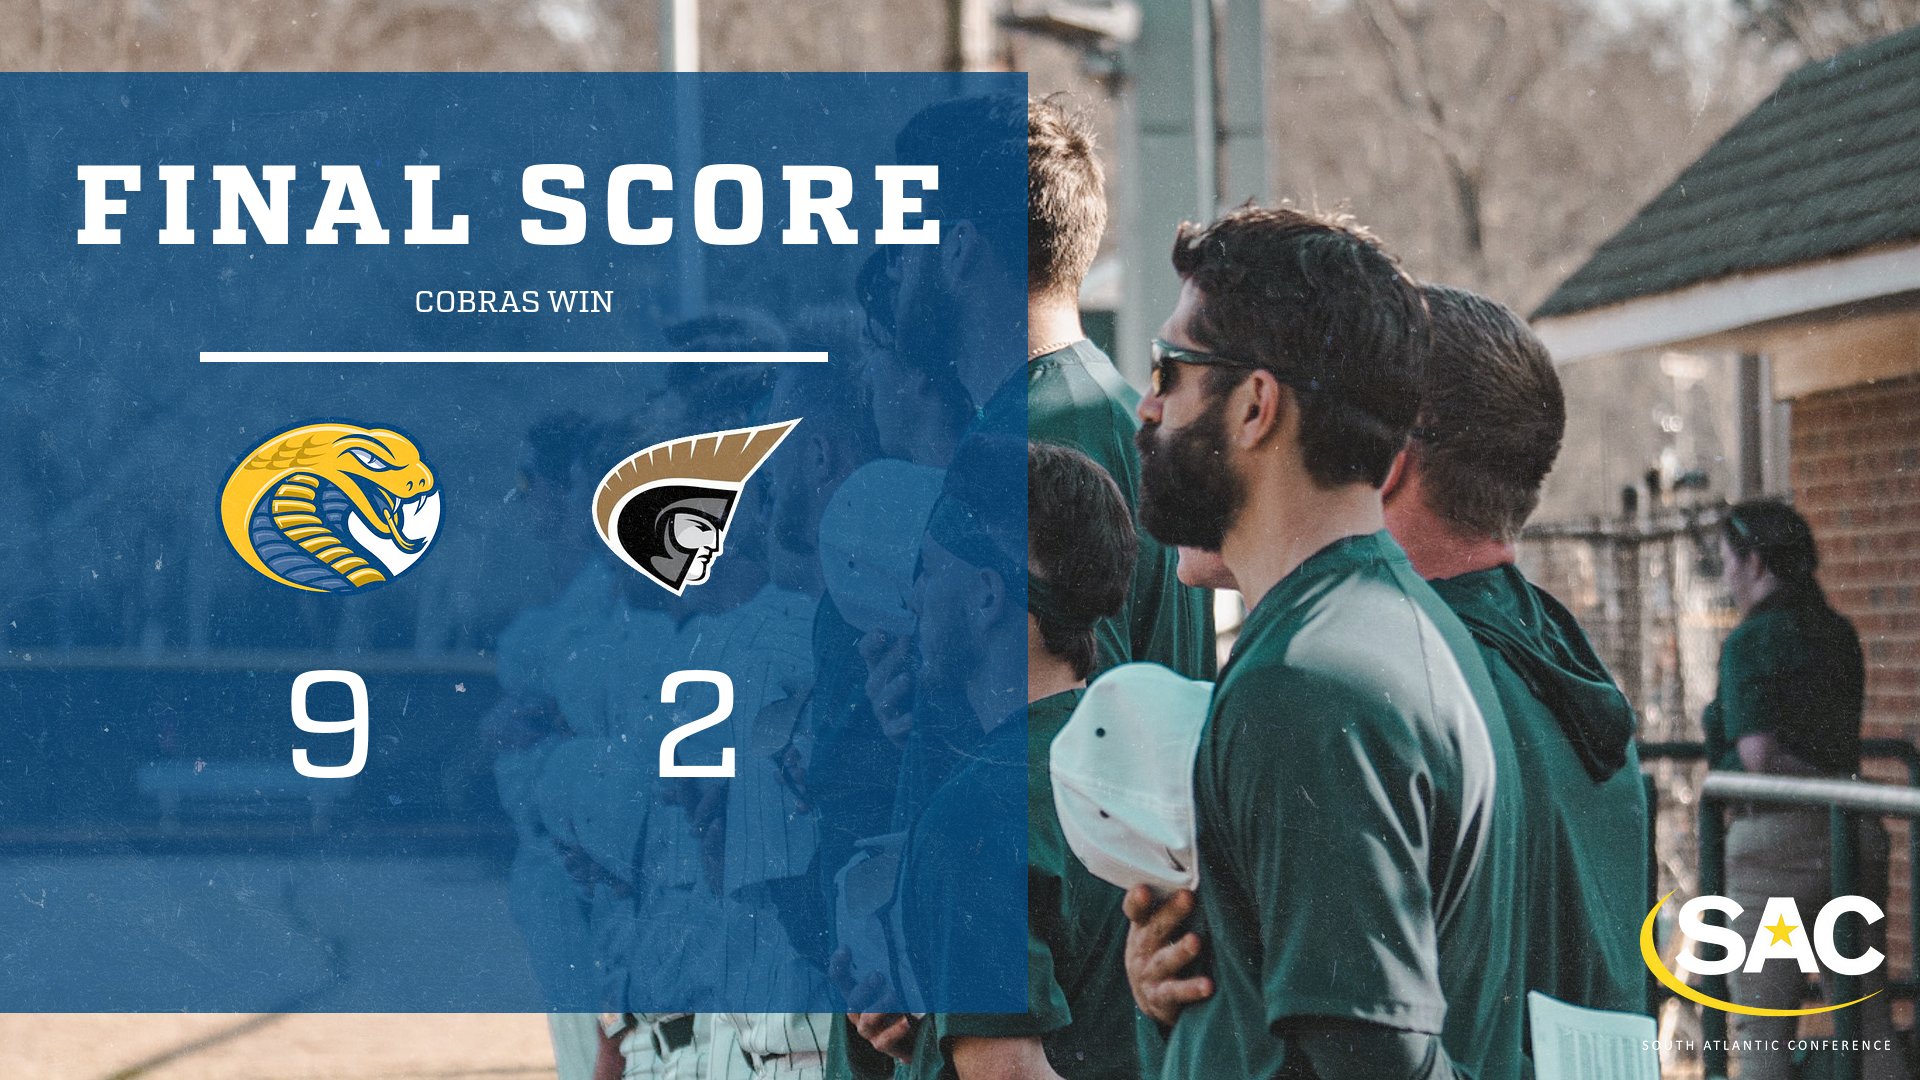 Cobras Take Game 1 in Their Anderson Series